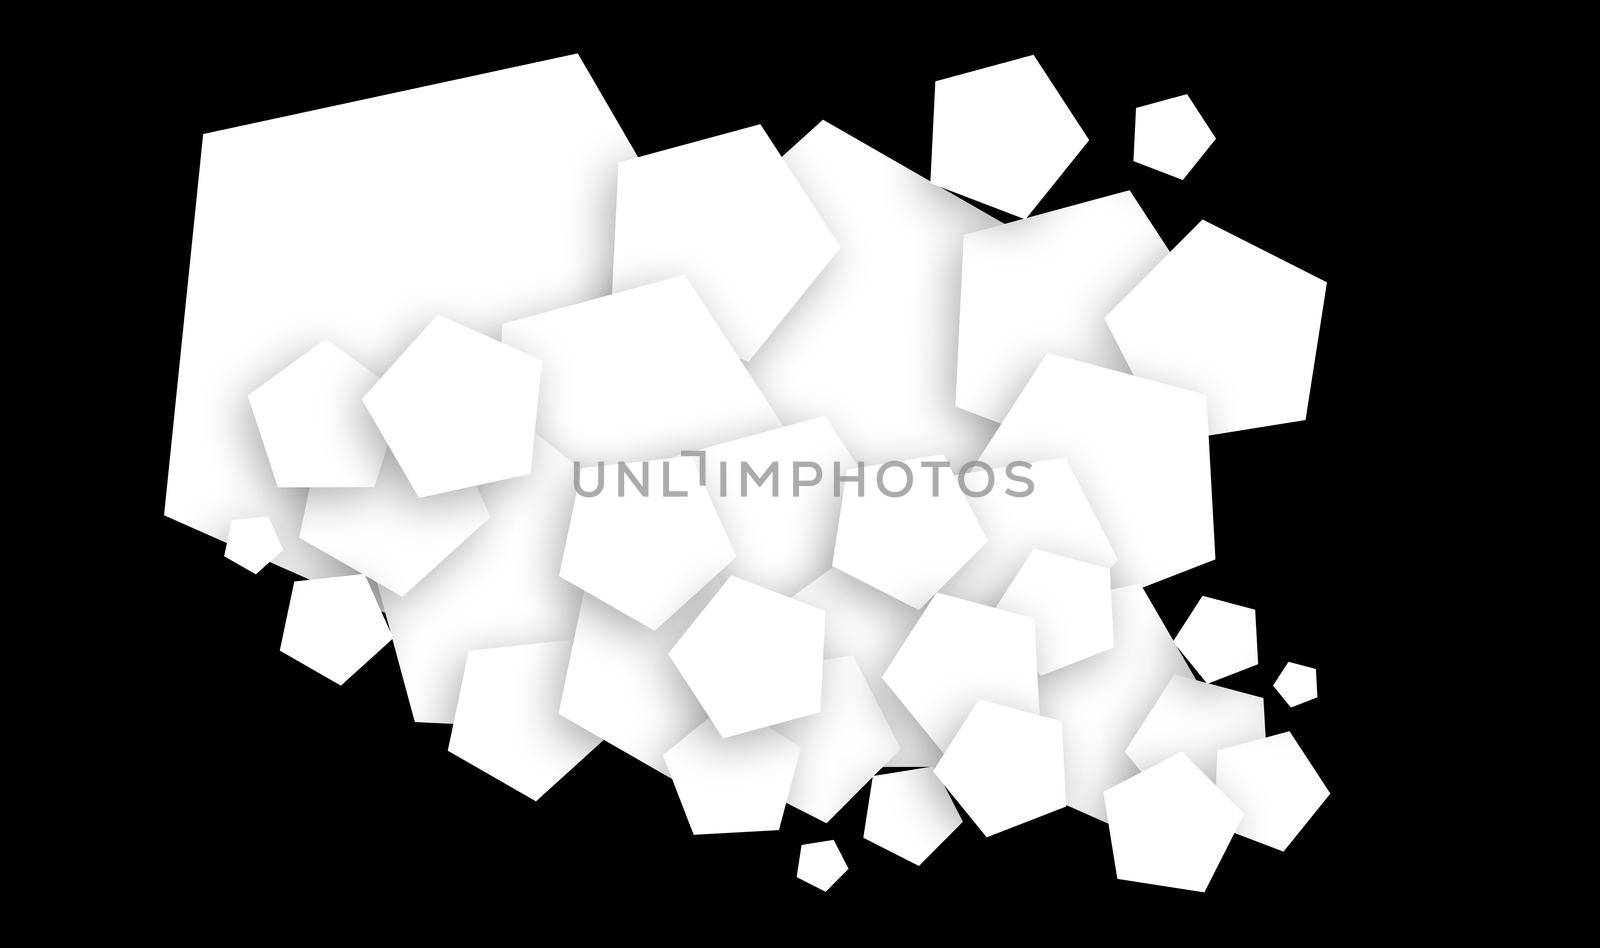 Pentagon shape design soft shadow on black backgrond stock photoAbstract, At The Edge Of, Backgrounds, Black And White, Black Background by tabishere